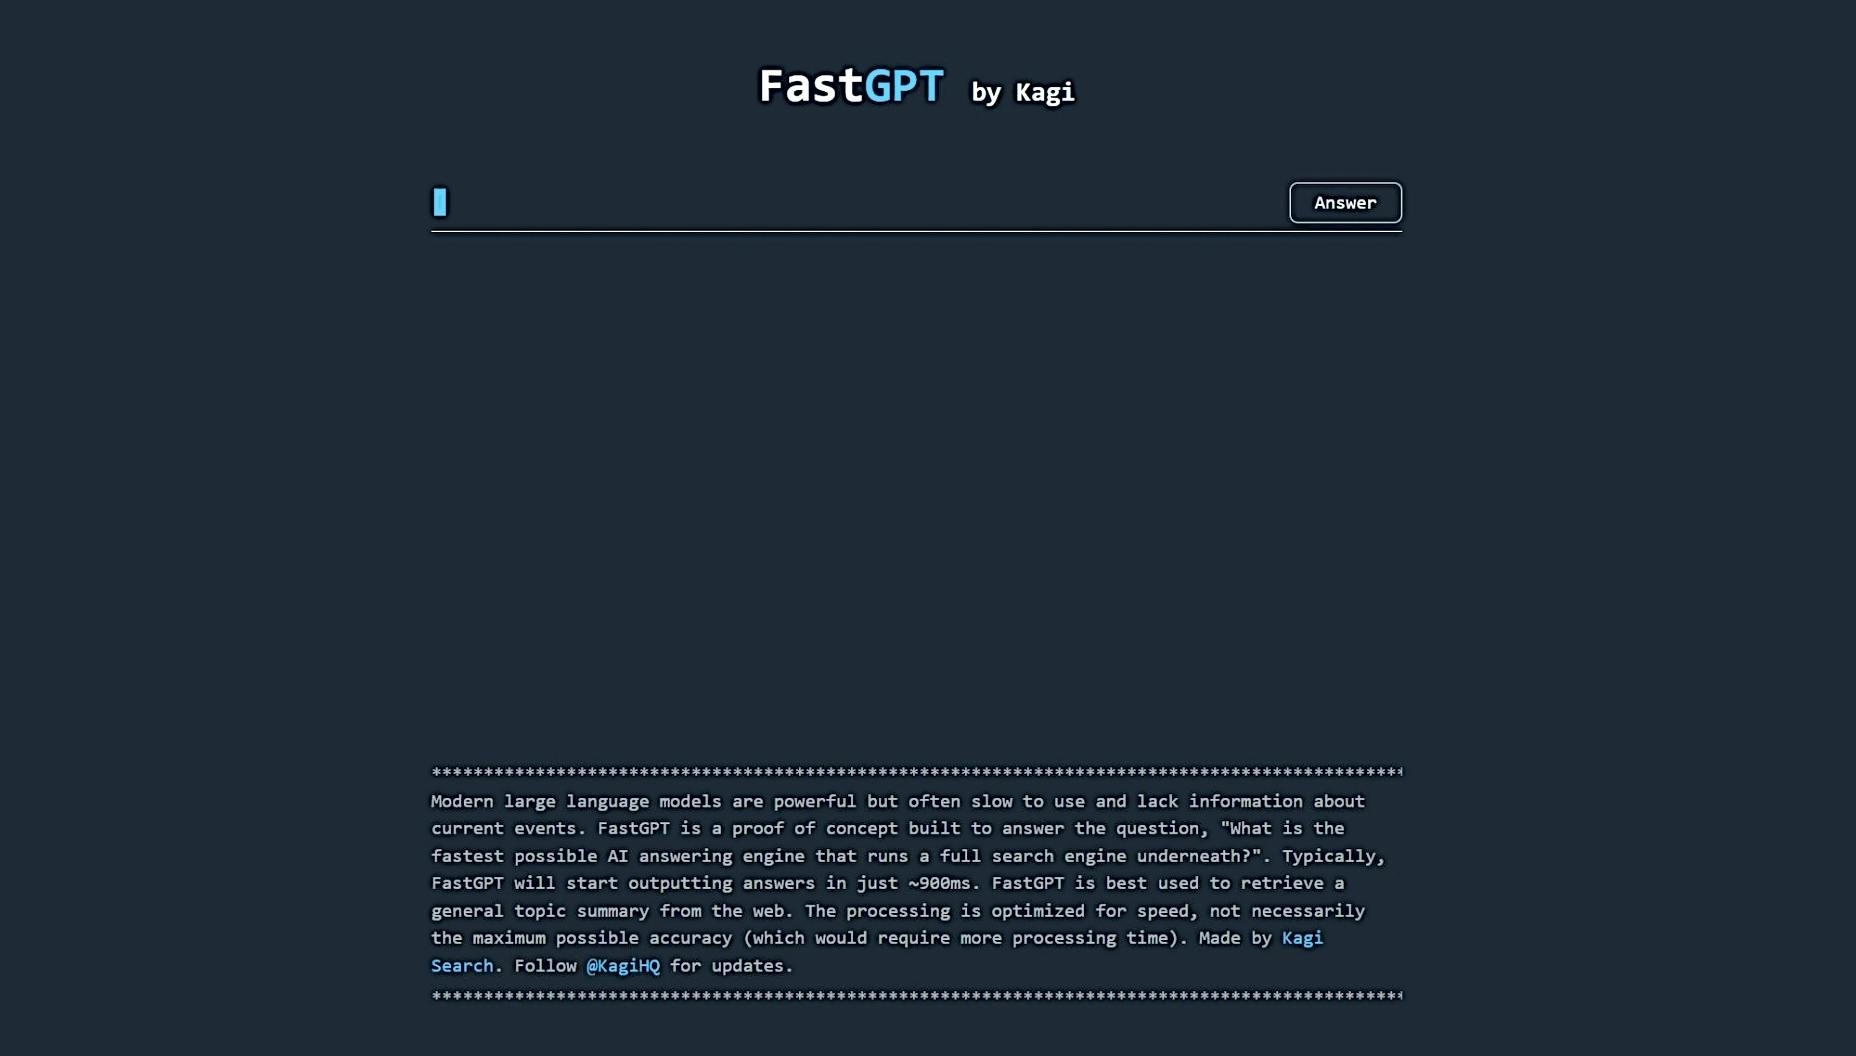 FastGPT featured